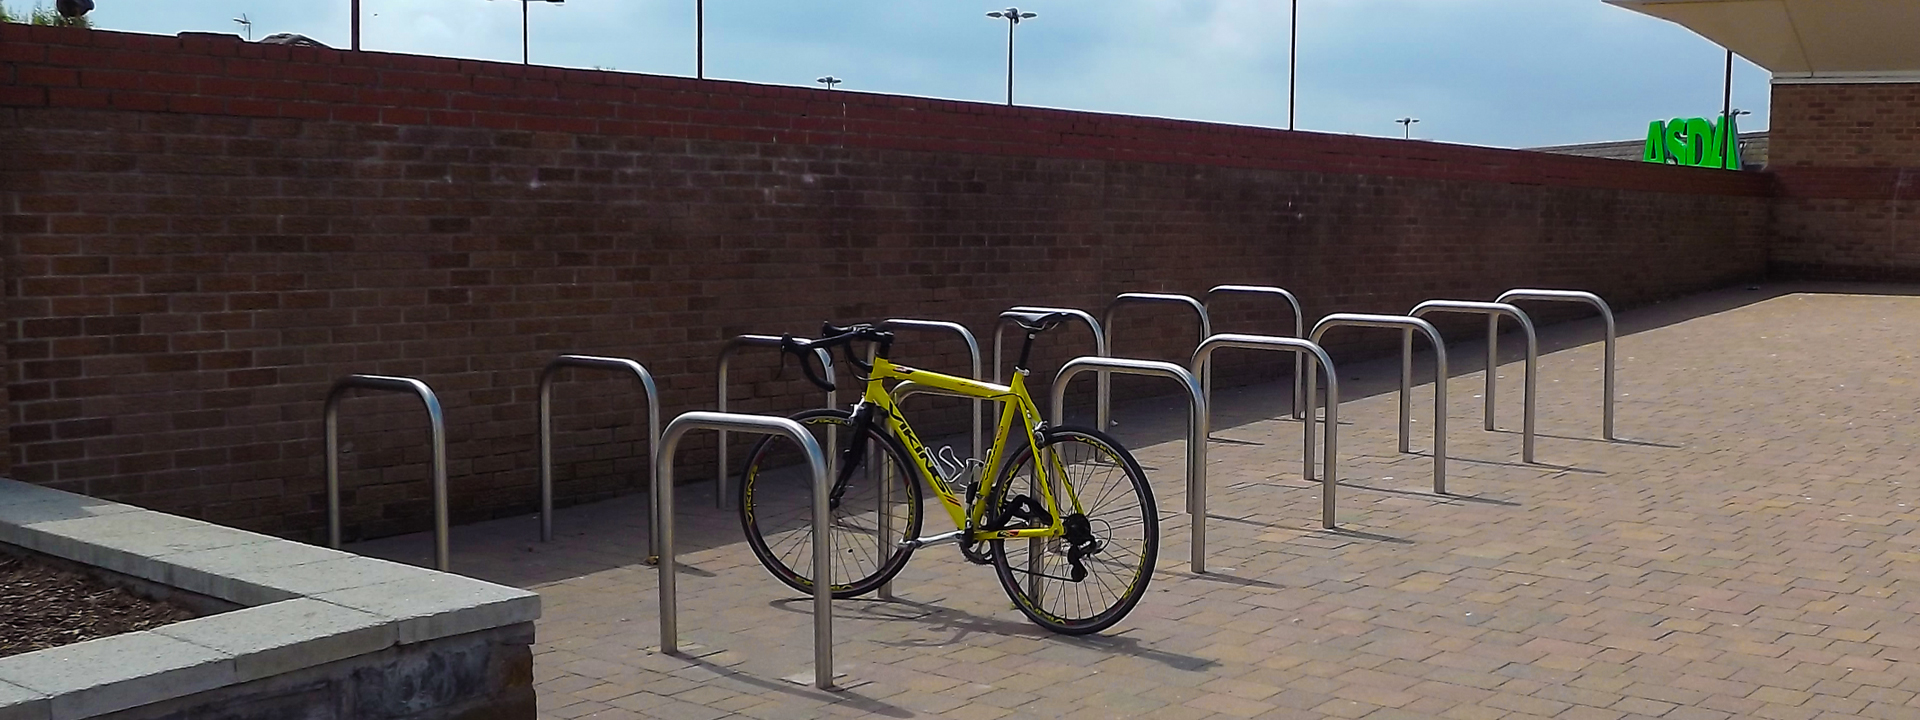 Good practice for cycle parking